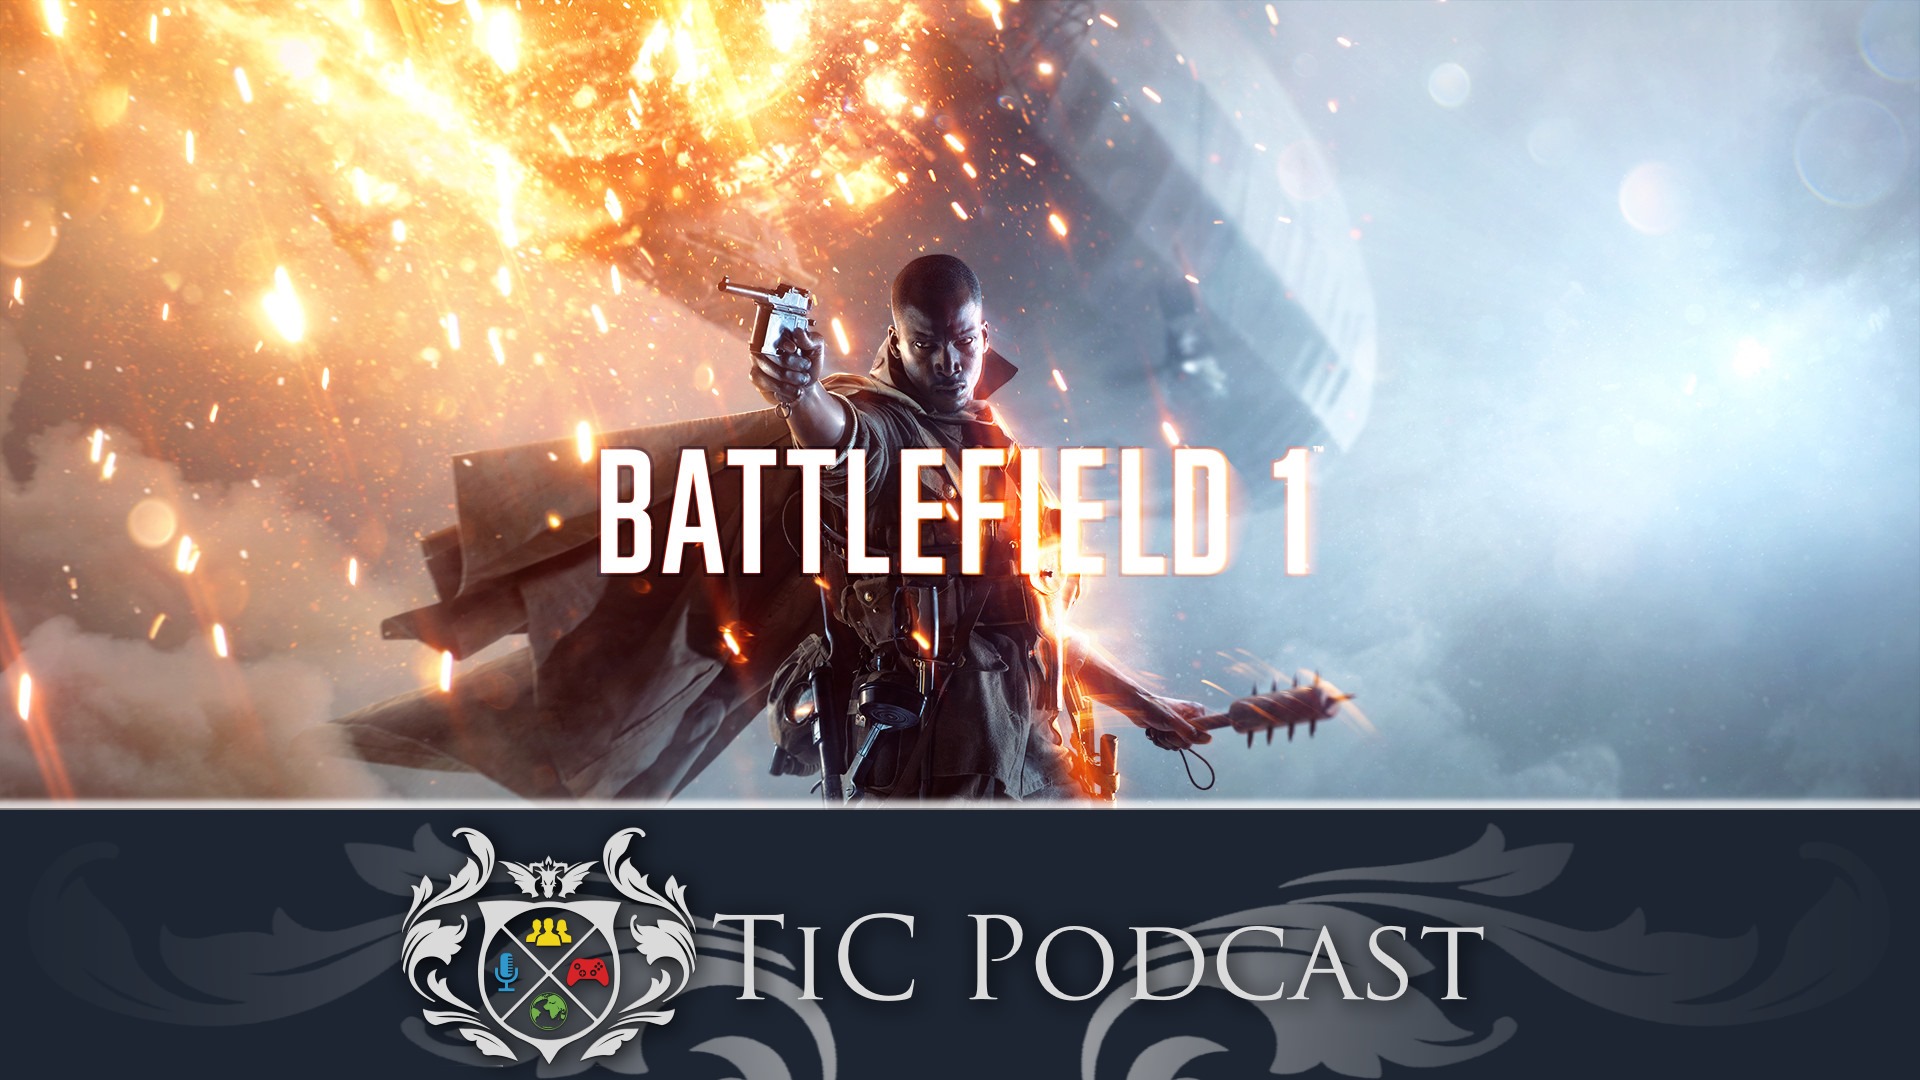 The Inner Circle Podcast Ep. 31 - Overwatch vs BattleBorn, Xbox has Jrpg's dropping & Cod vs BF1 